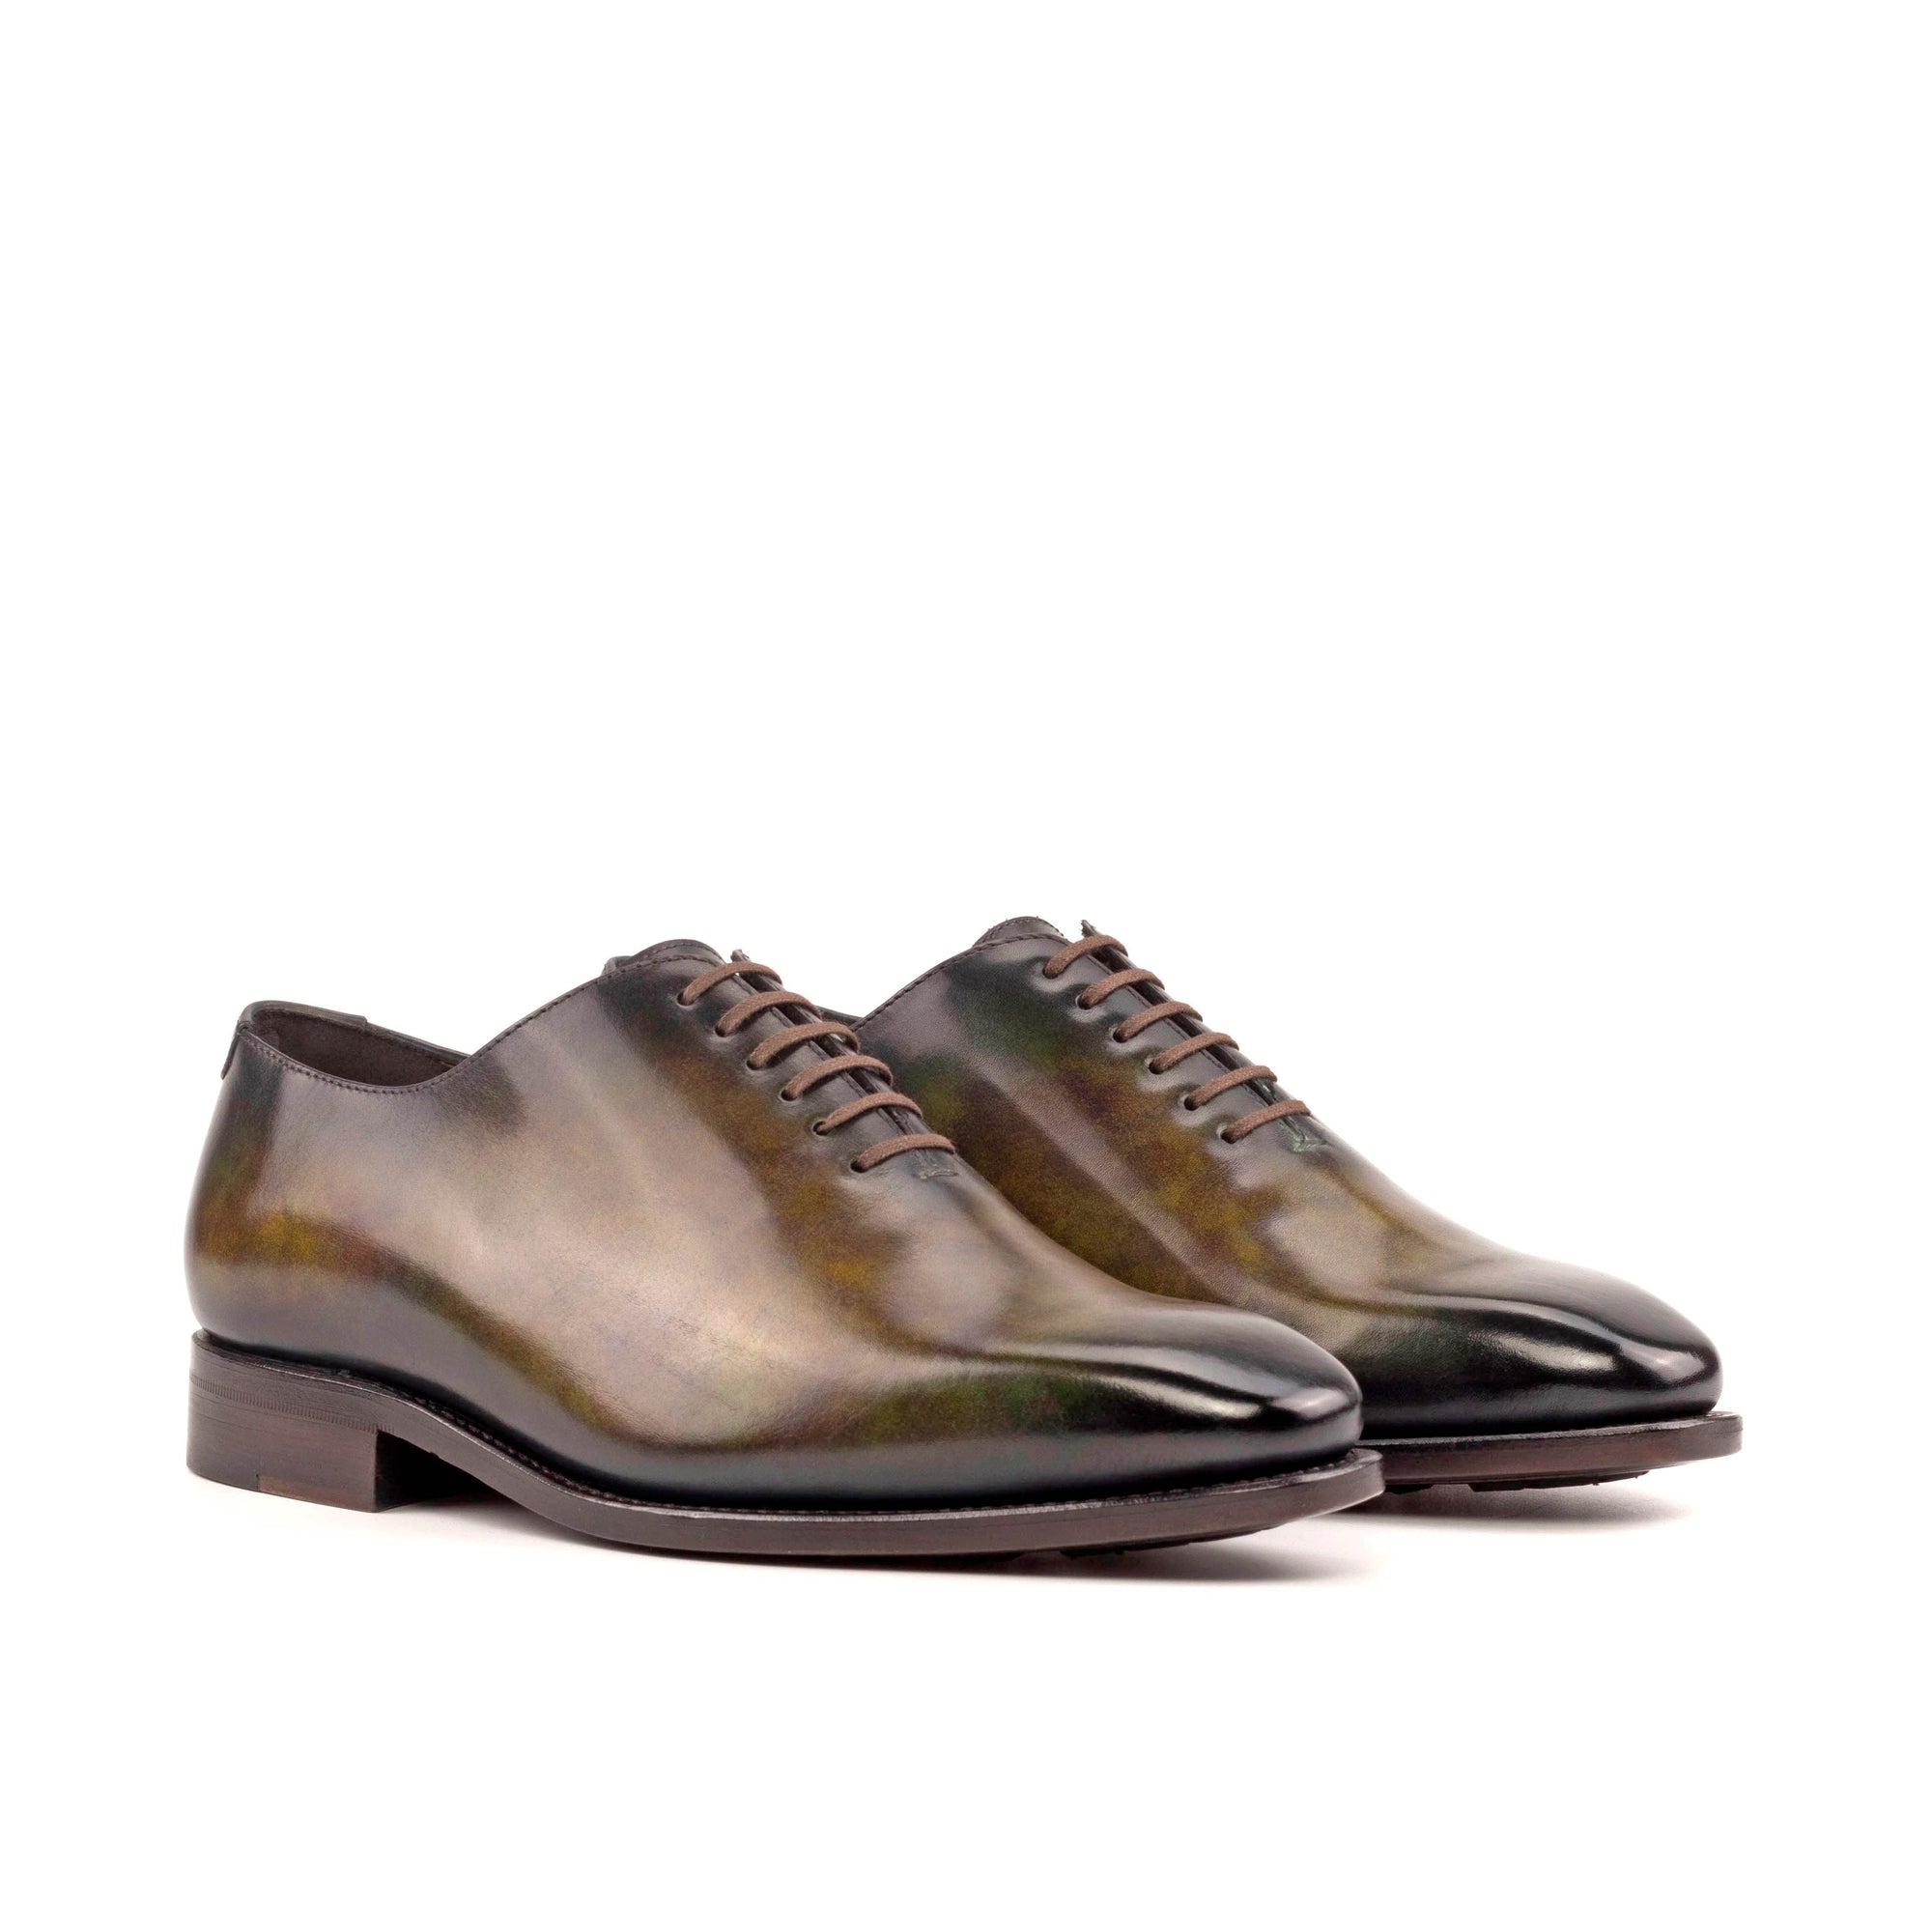 Whole cut leather shoes - handmade luxury Goodyear welted shoes